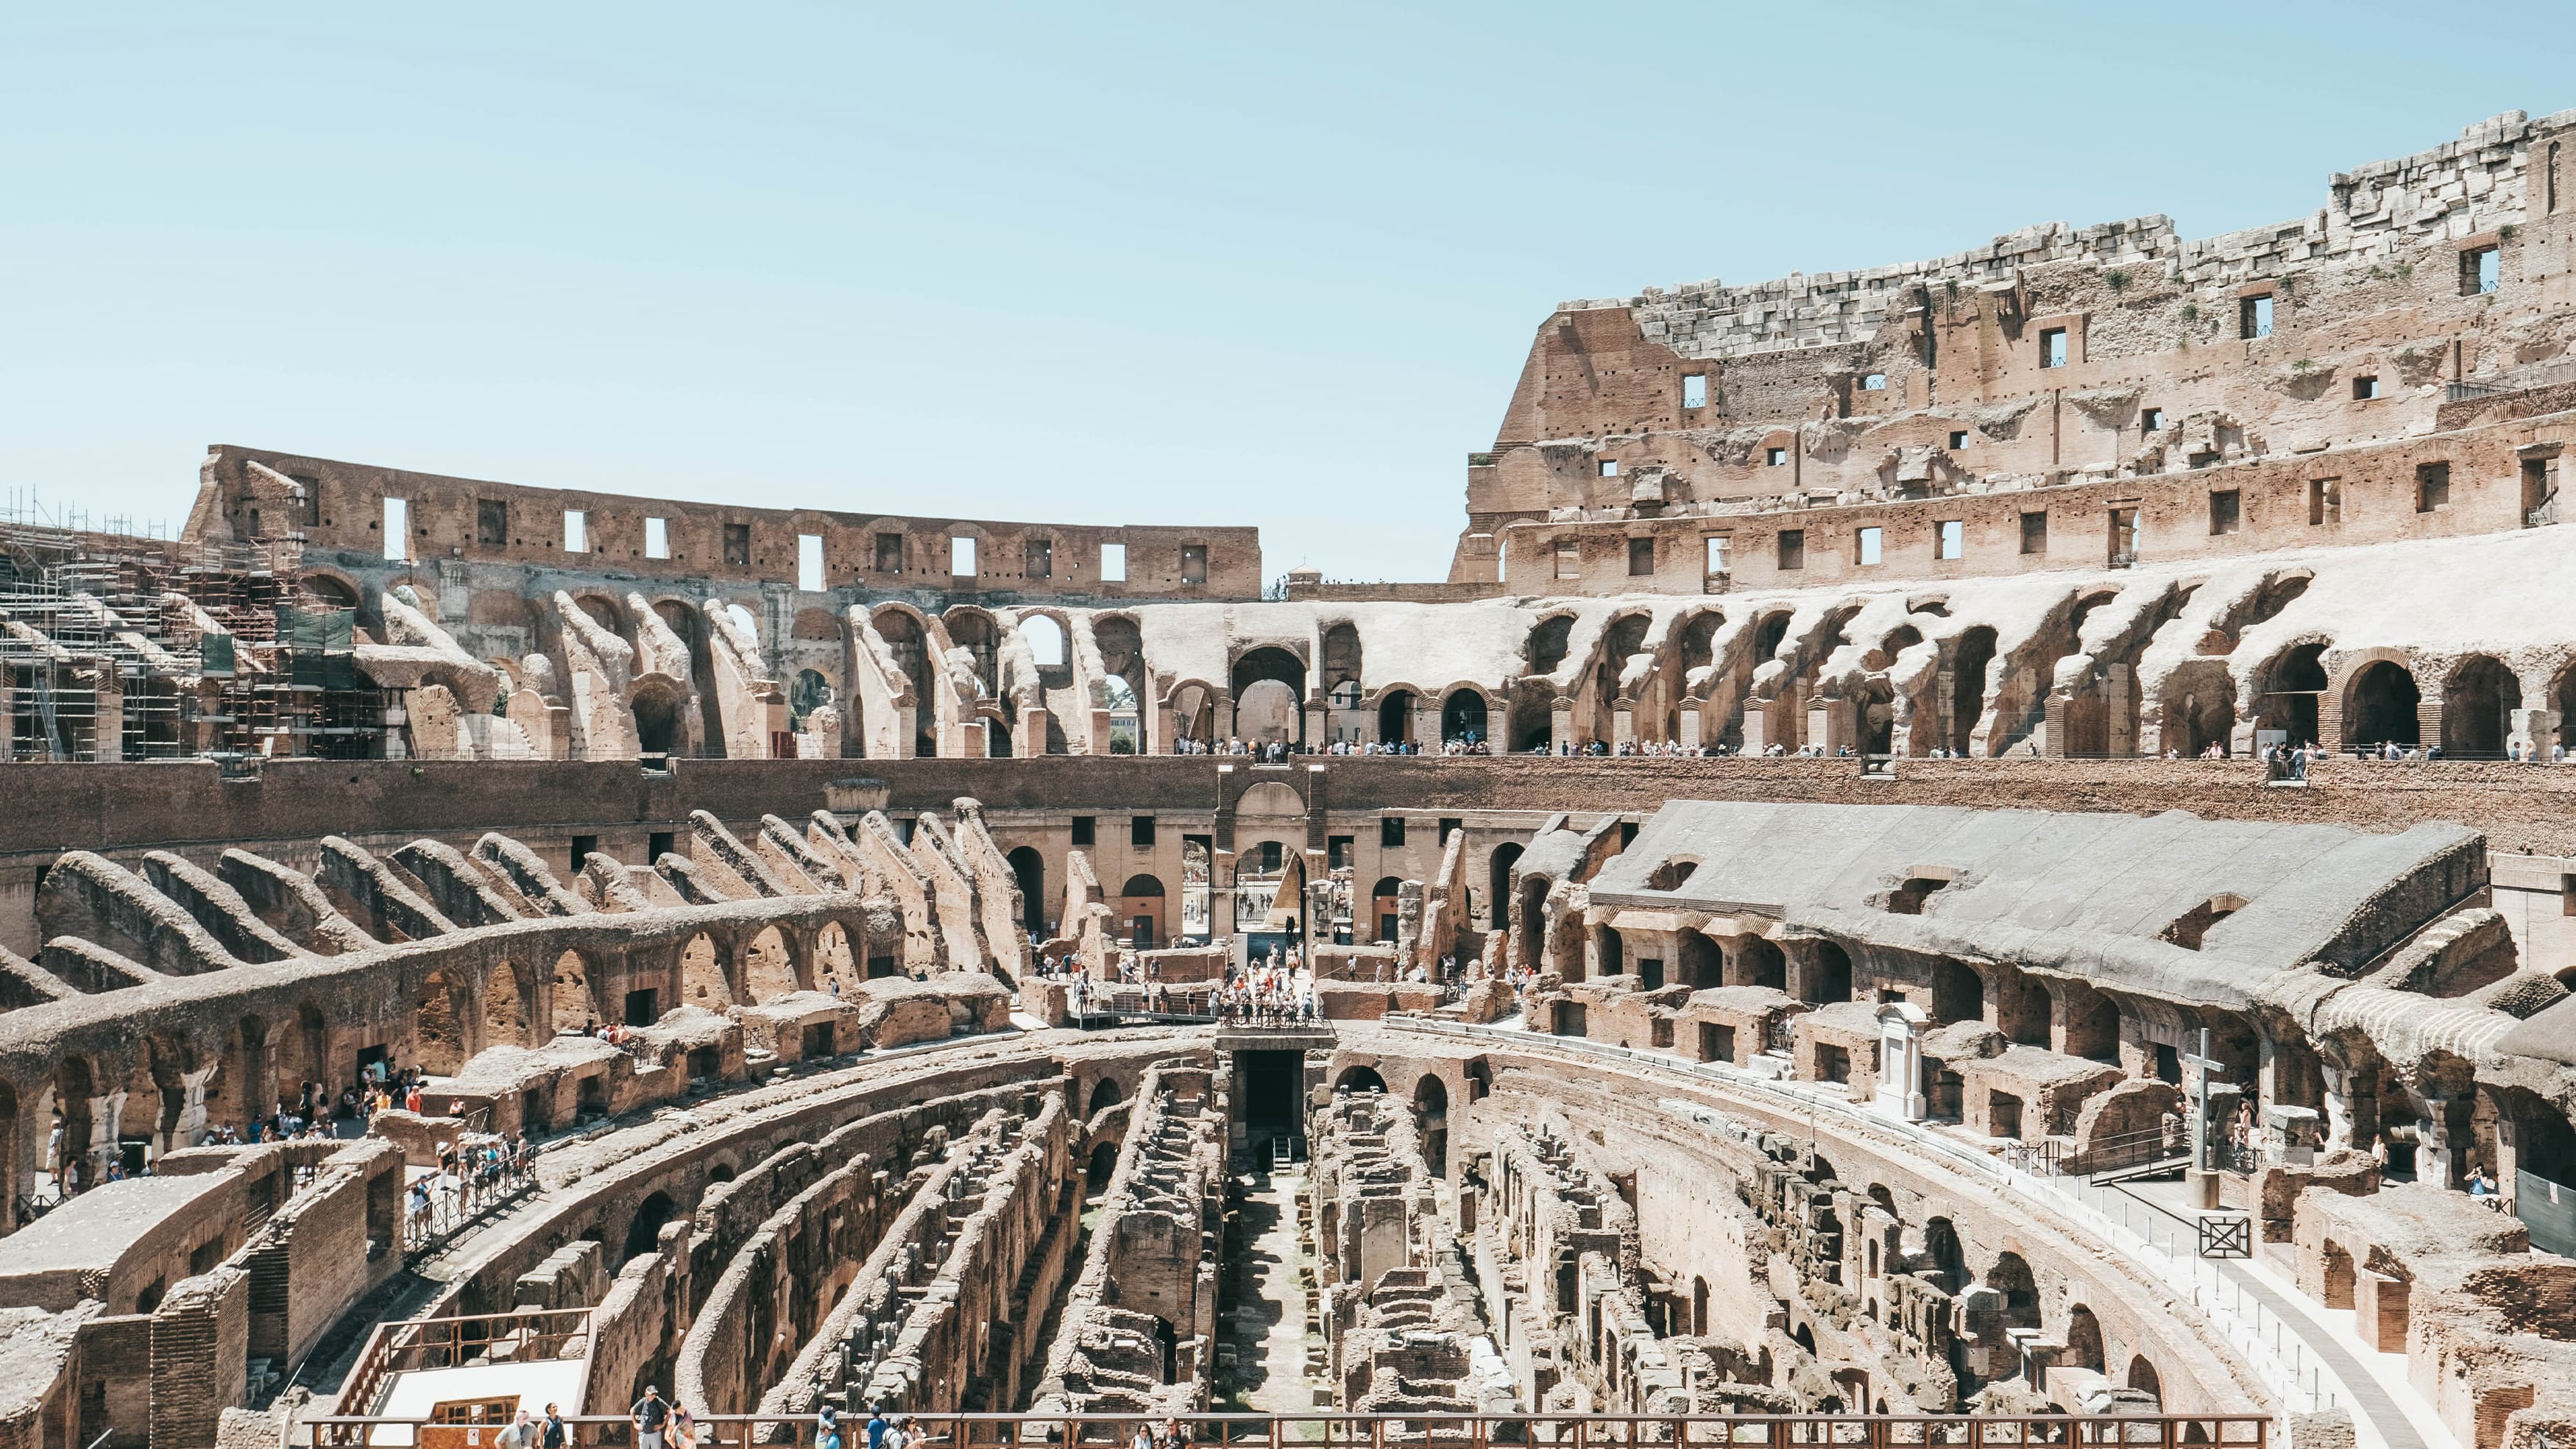 Colosseum in Rome, Italy is an example of placemaking dating back centuries